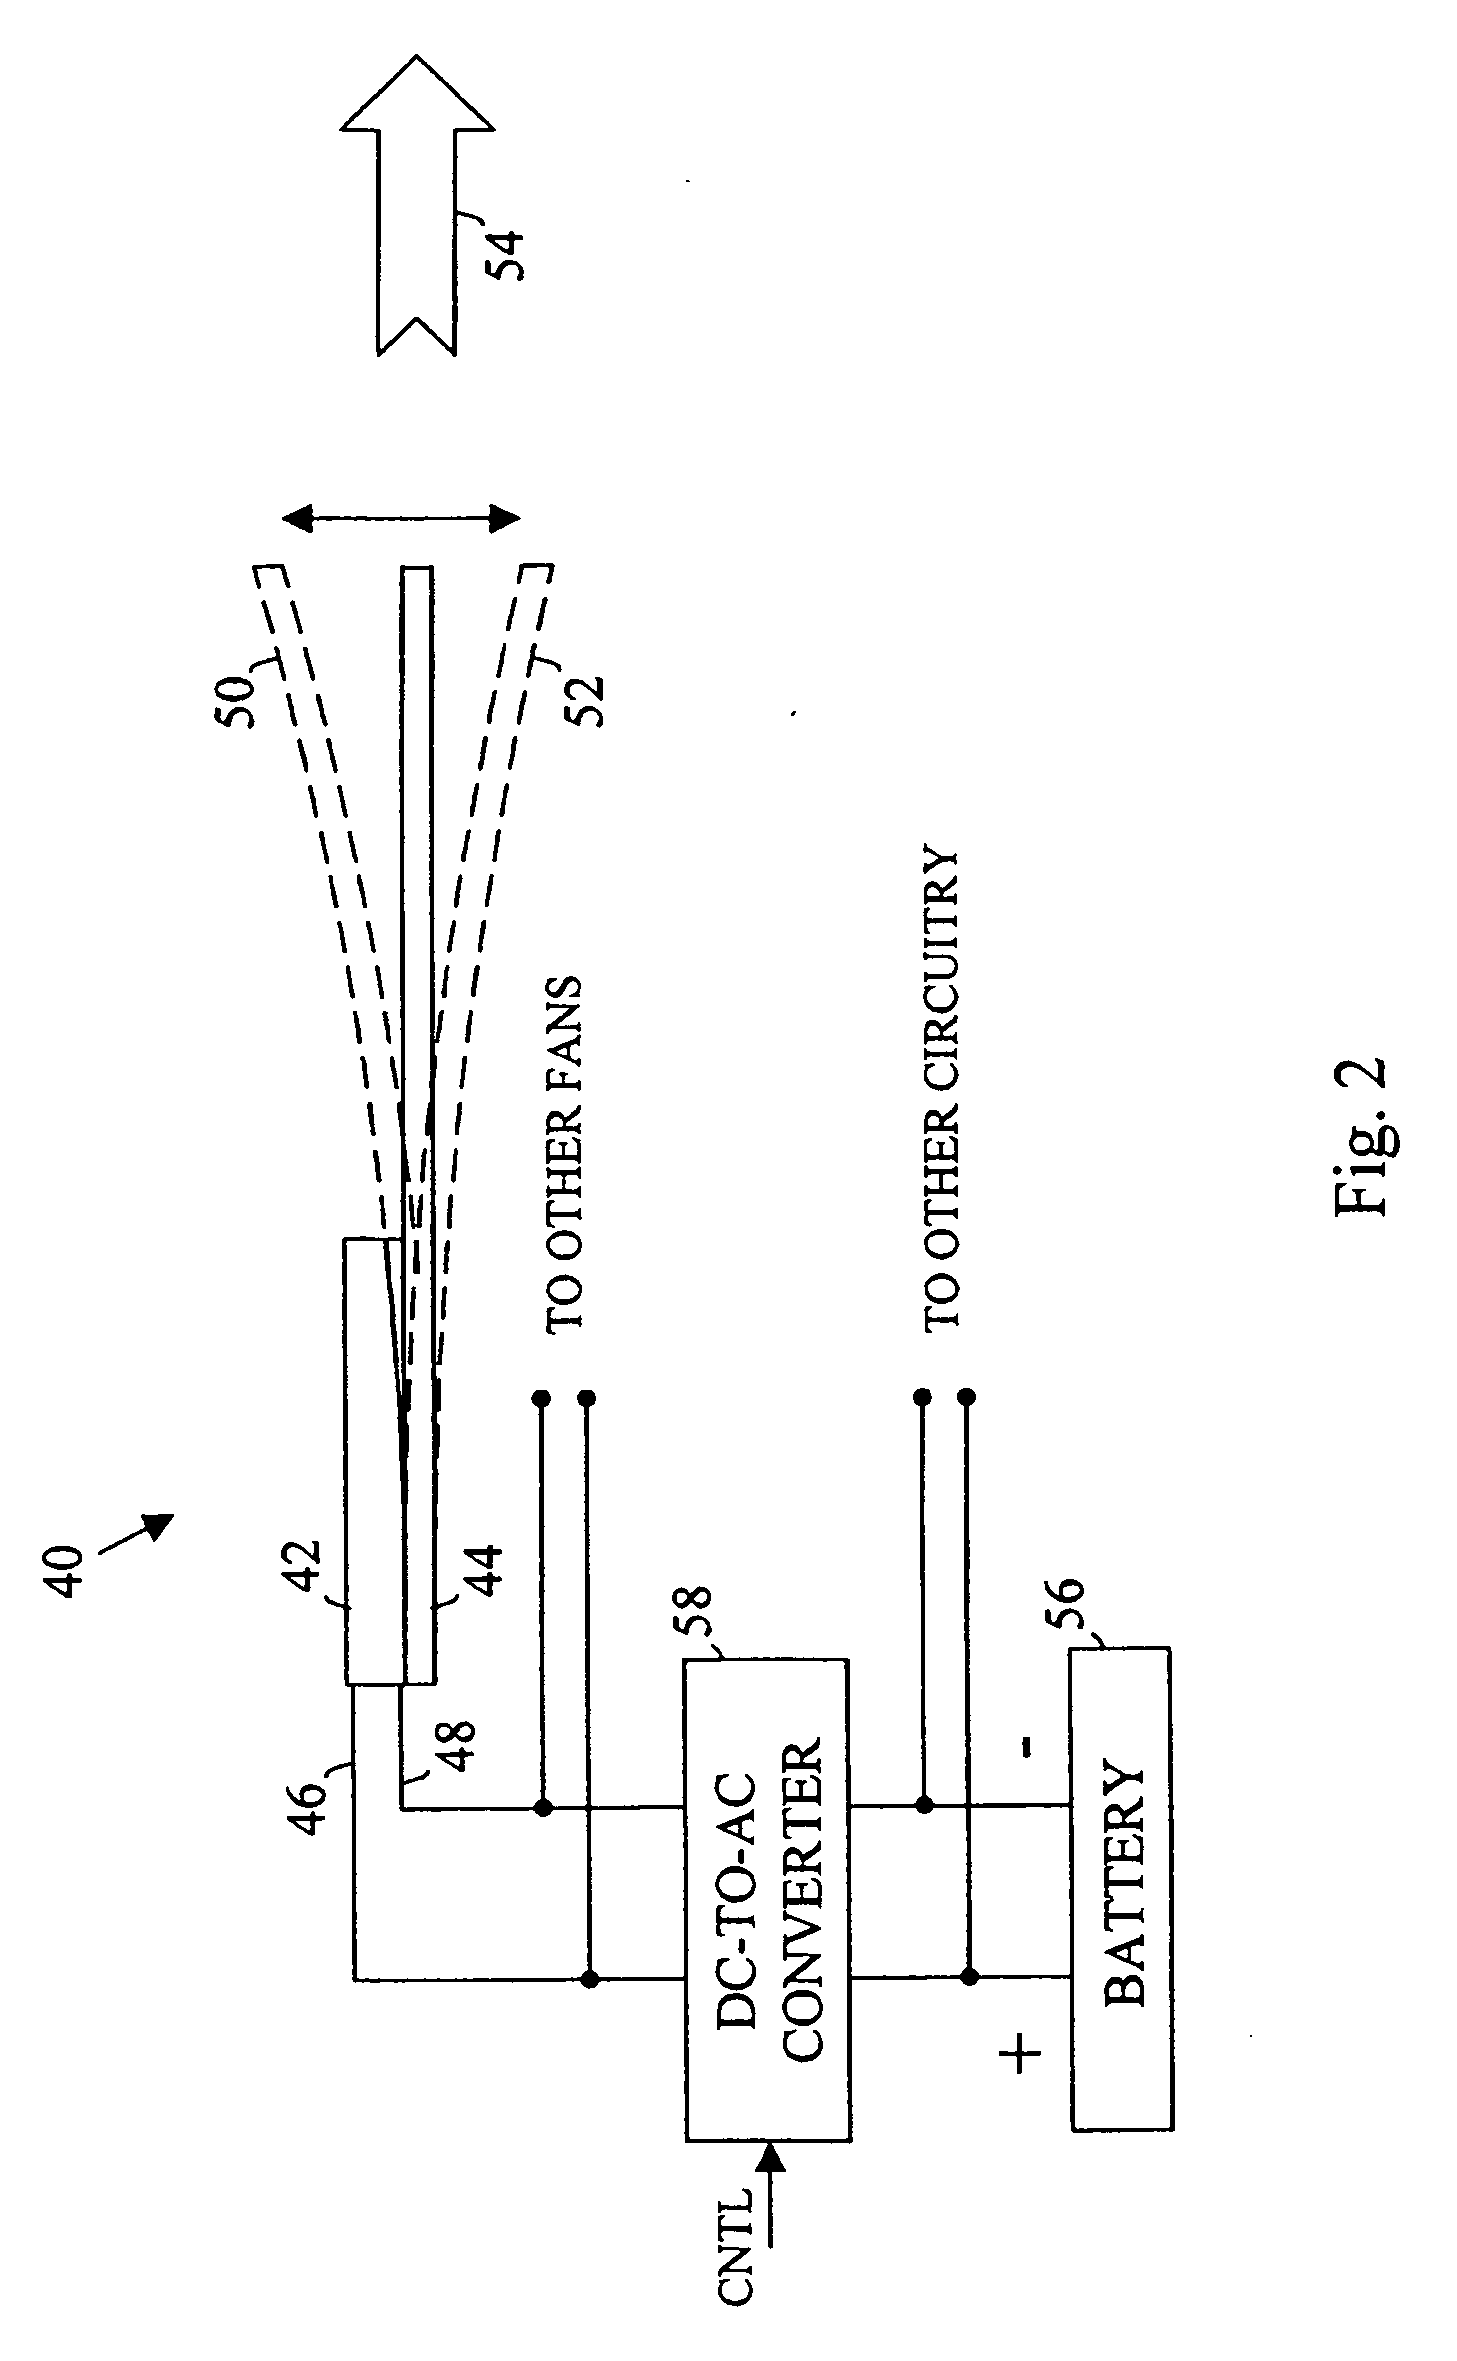 Wireless device enclosure using piezoelectric cooling structures